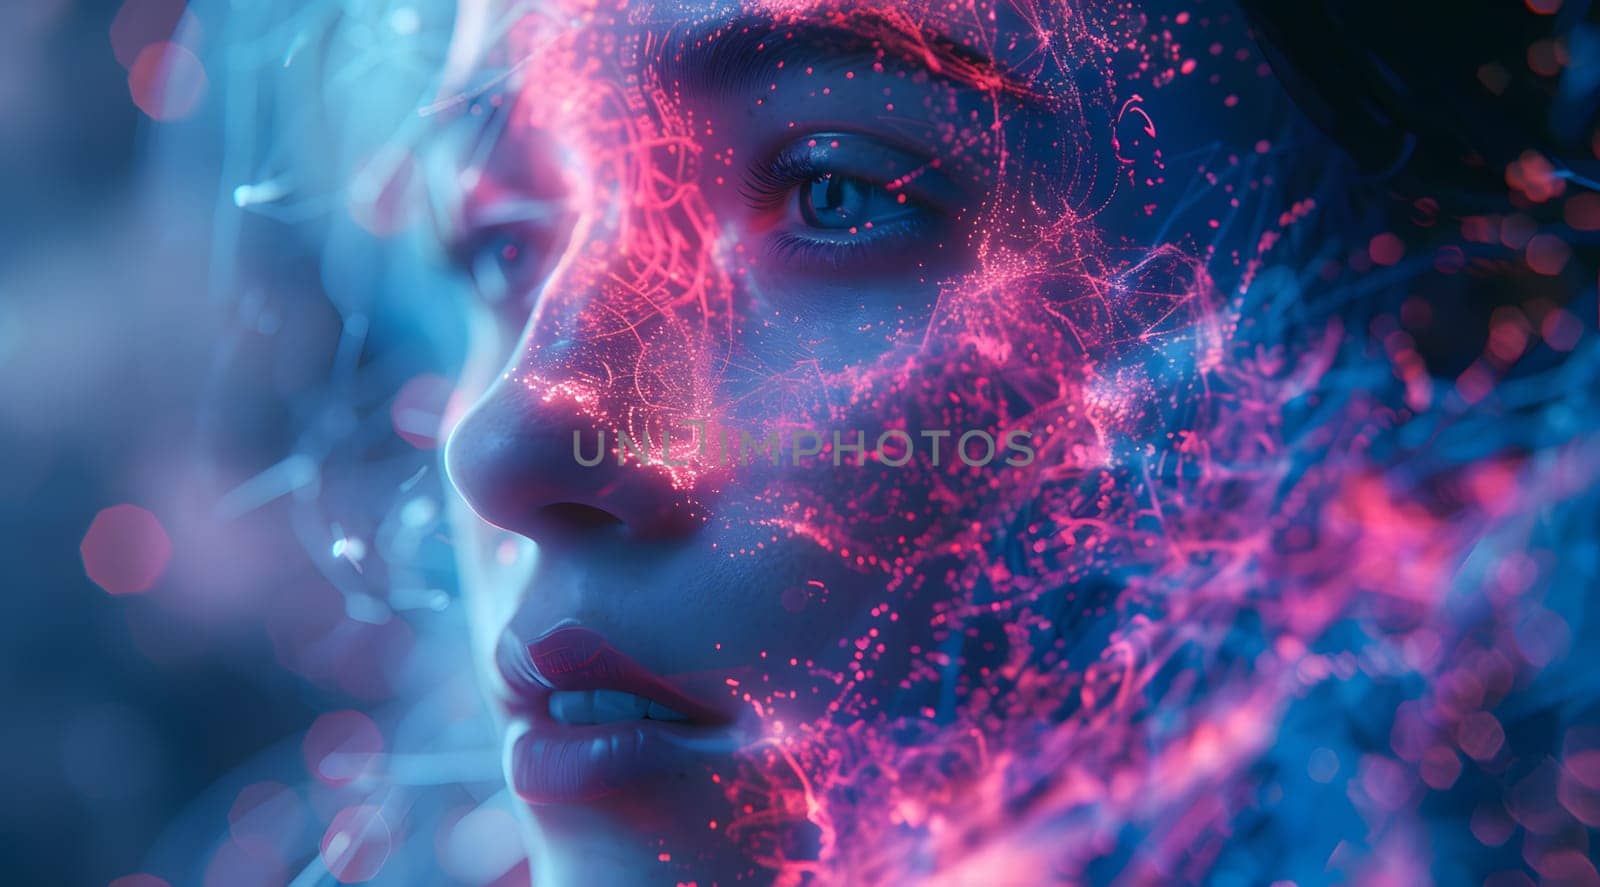 A close up of a womans face emitting glowing particles in shades of violet, magenta, and electric blue, creating an otherworldly organism in spacelike atmosphere